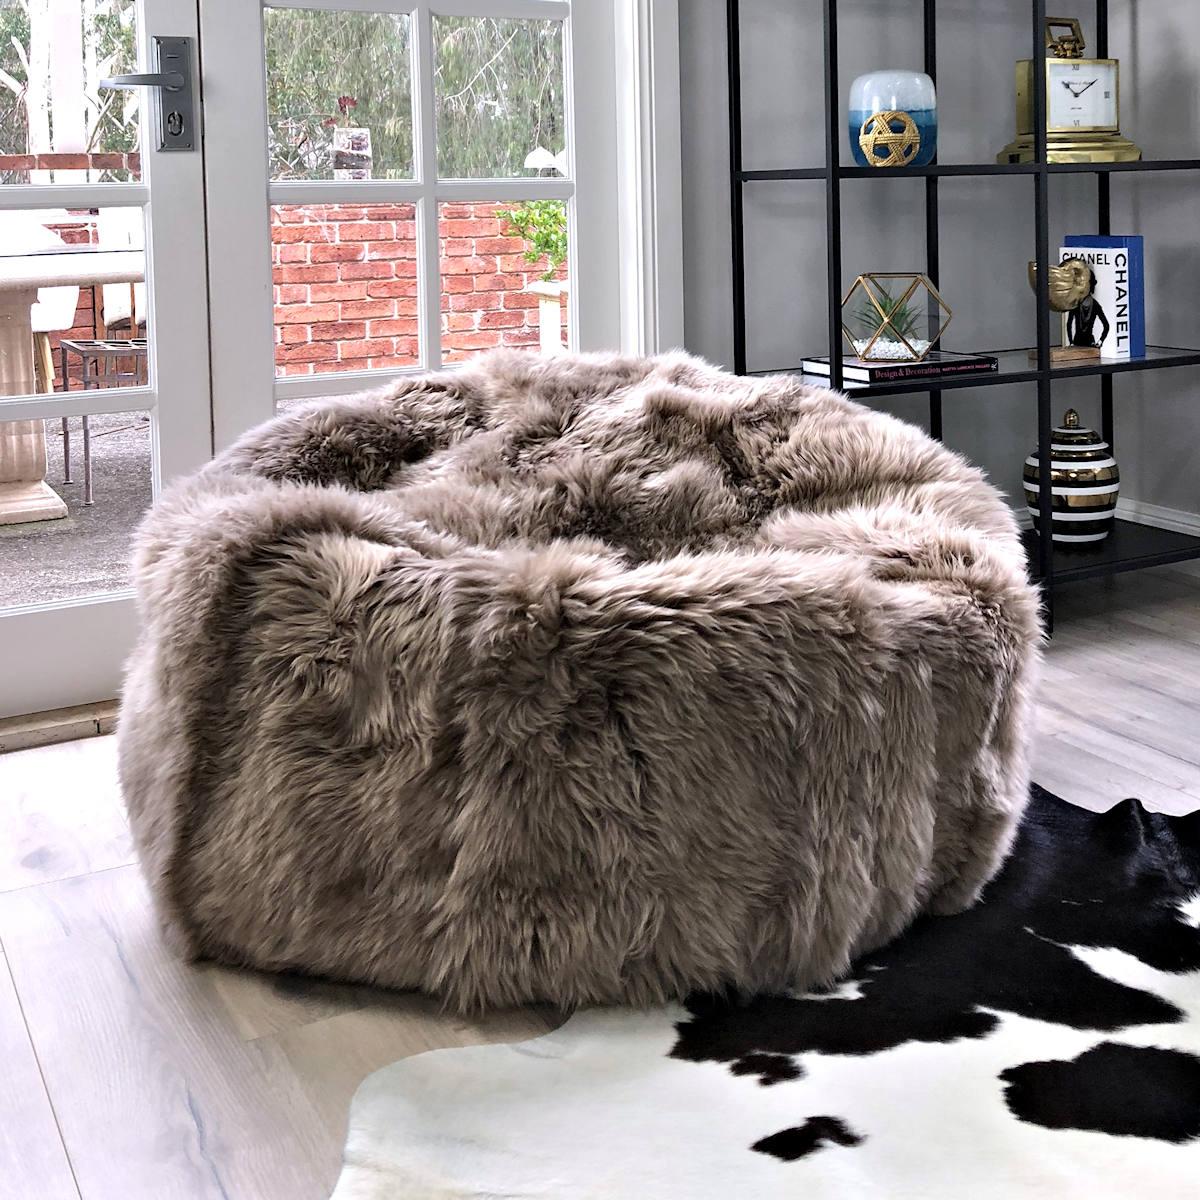 

After a long day at work, there is no better way to relax than submerging into the oozing comfort of our fur bean bag chair cover.

Handcrafted in Australia using the finest and genuine Australian Merino sheepskins in our delicious fashion-dyed